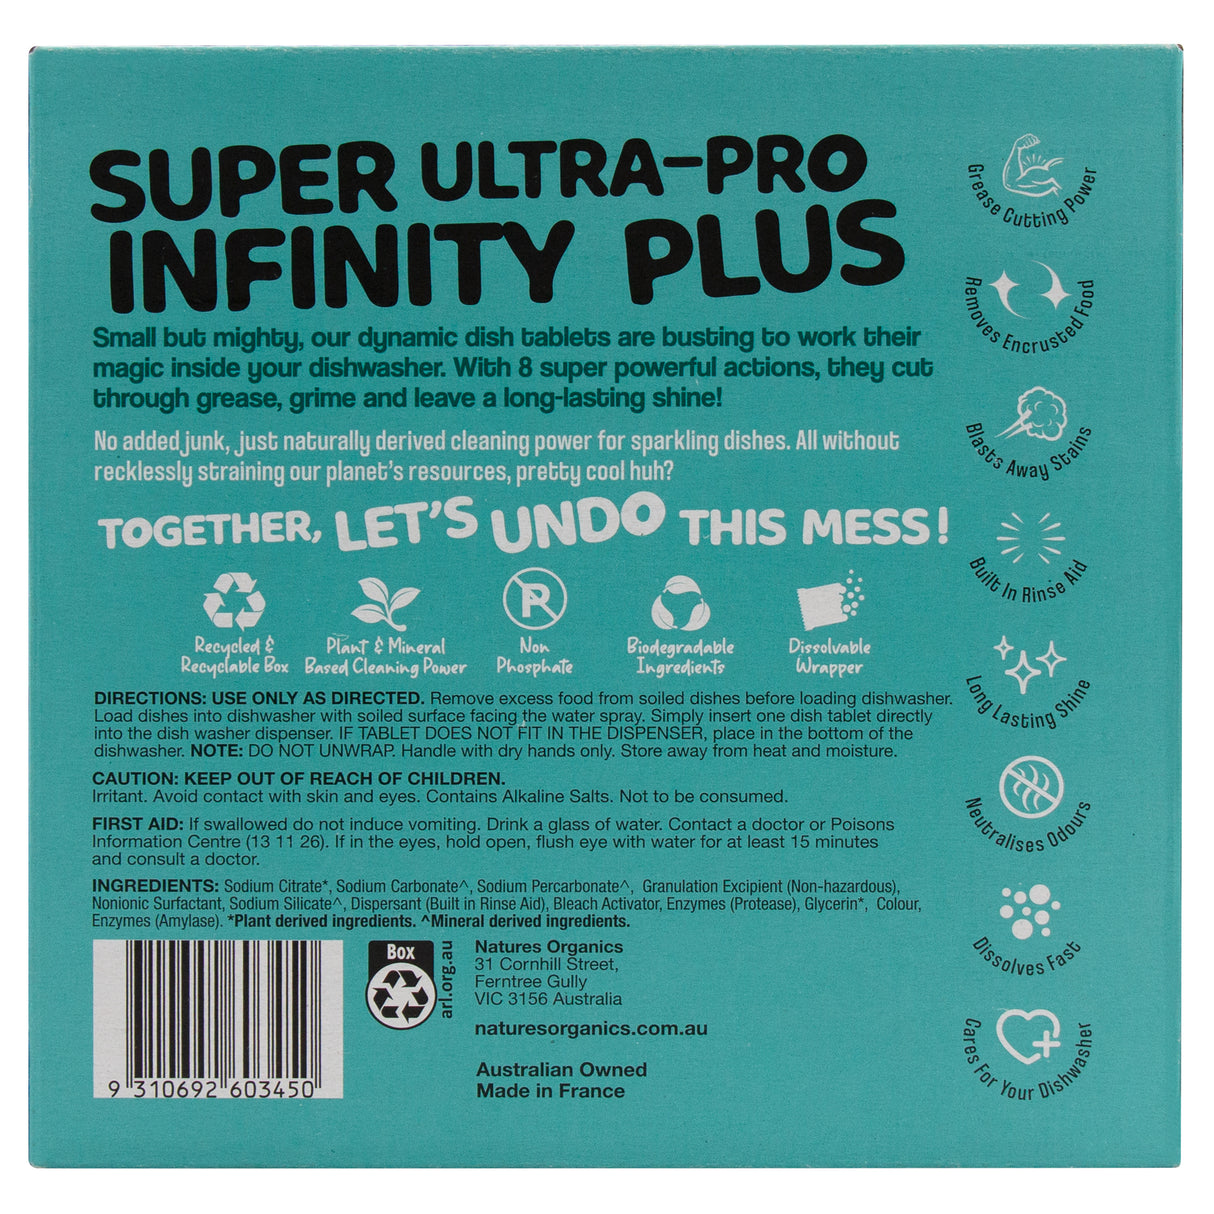 Undo This Mess Super Ultra- Pro Infinity Plus Dish Tablets 48 Pack